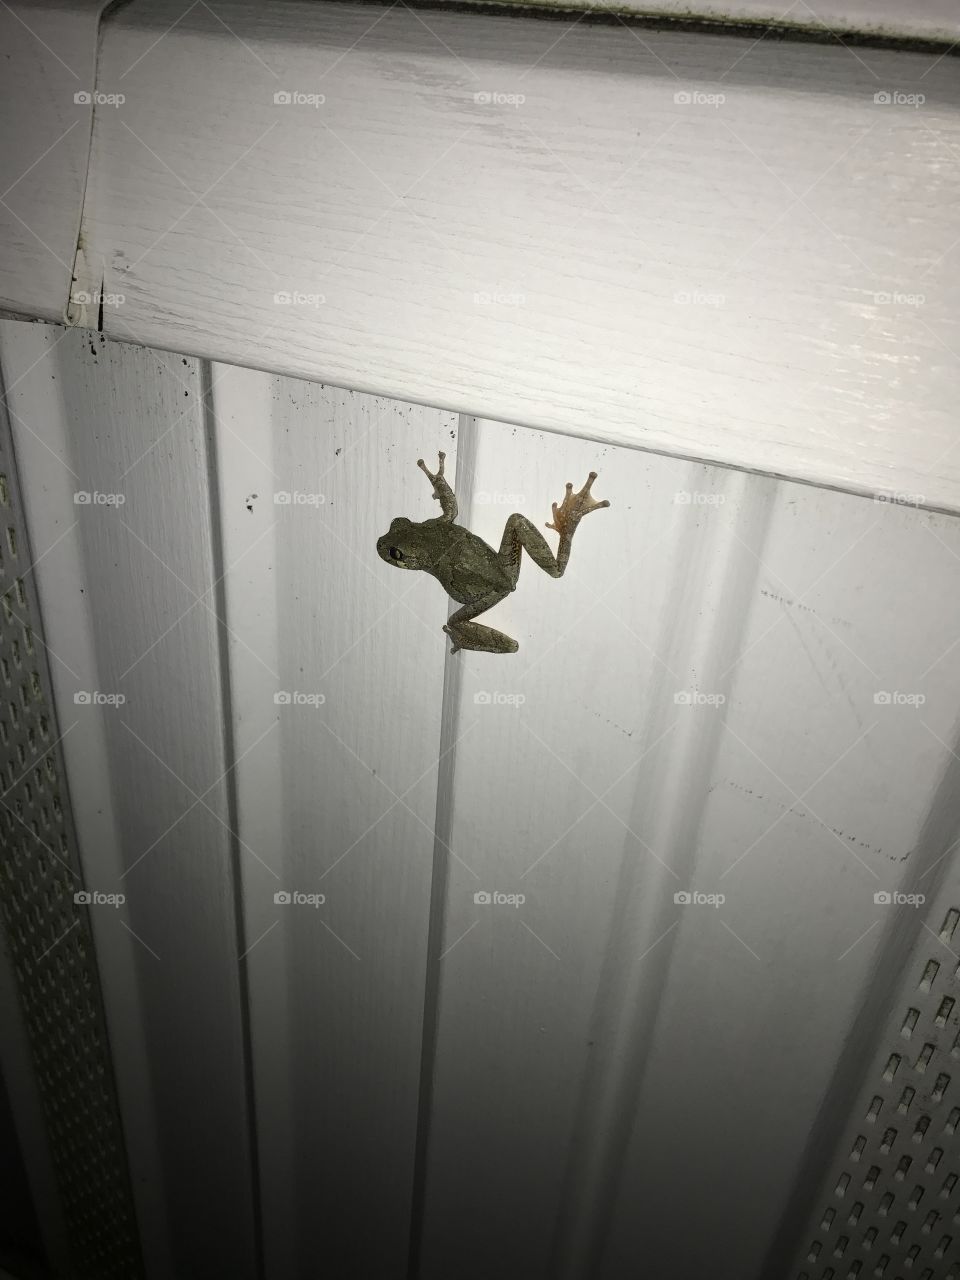 Frog on building